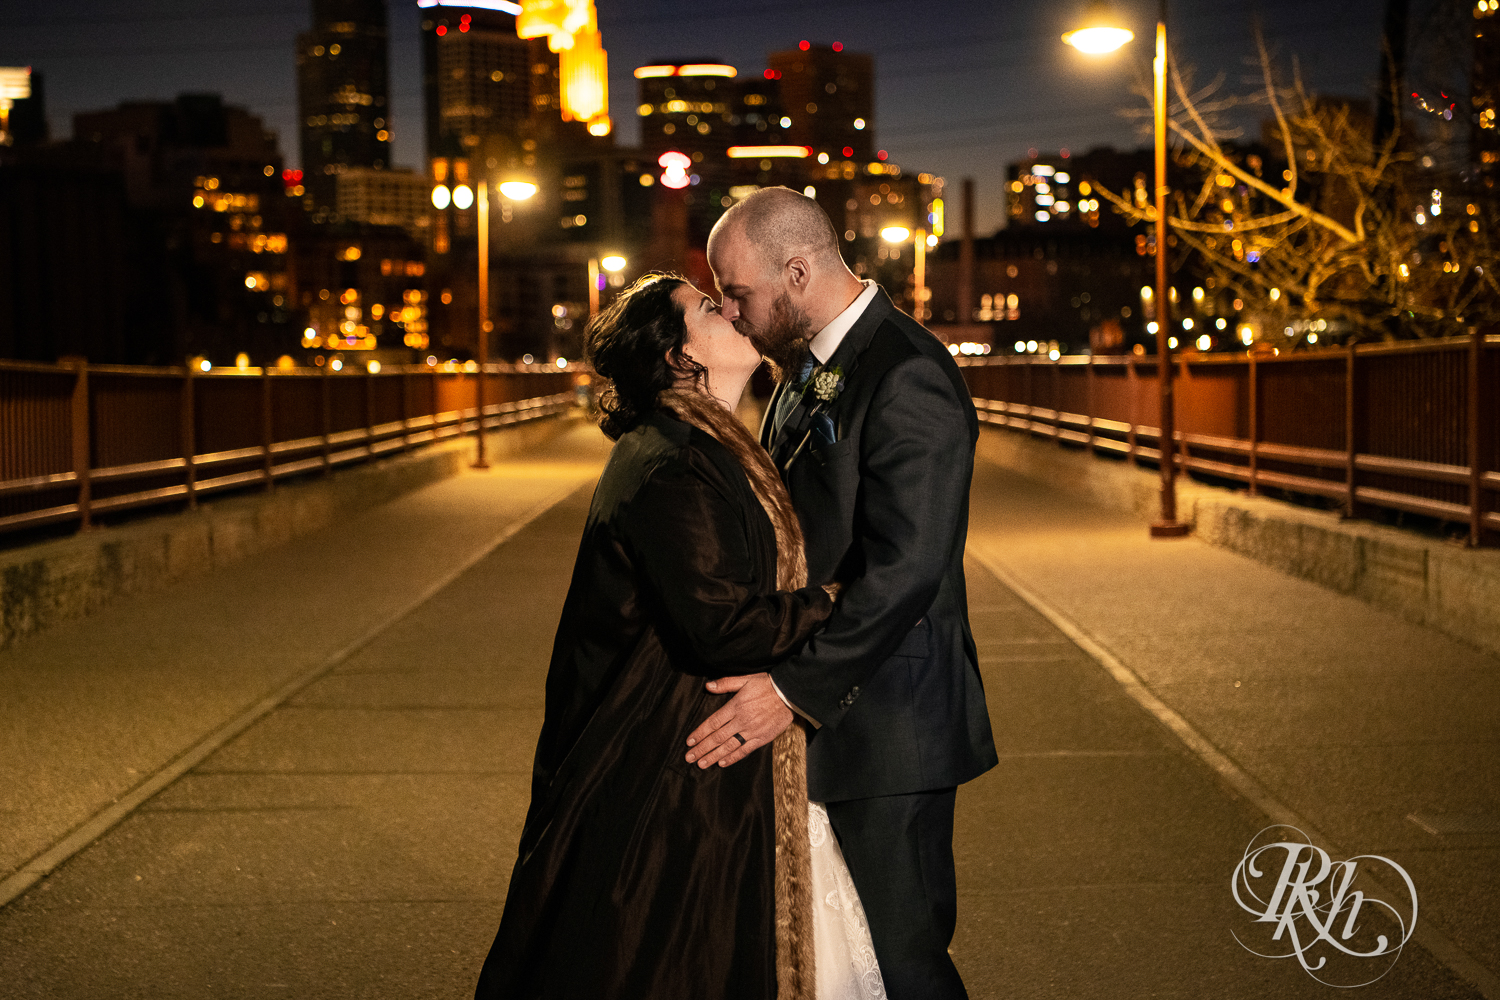 Bride and groom kiss at night in front of city skyline in Minneapolis, Minnesota on Stone Arch Bridge.